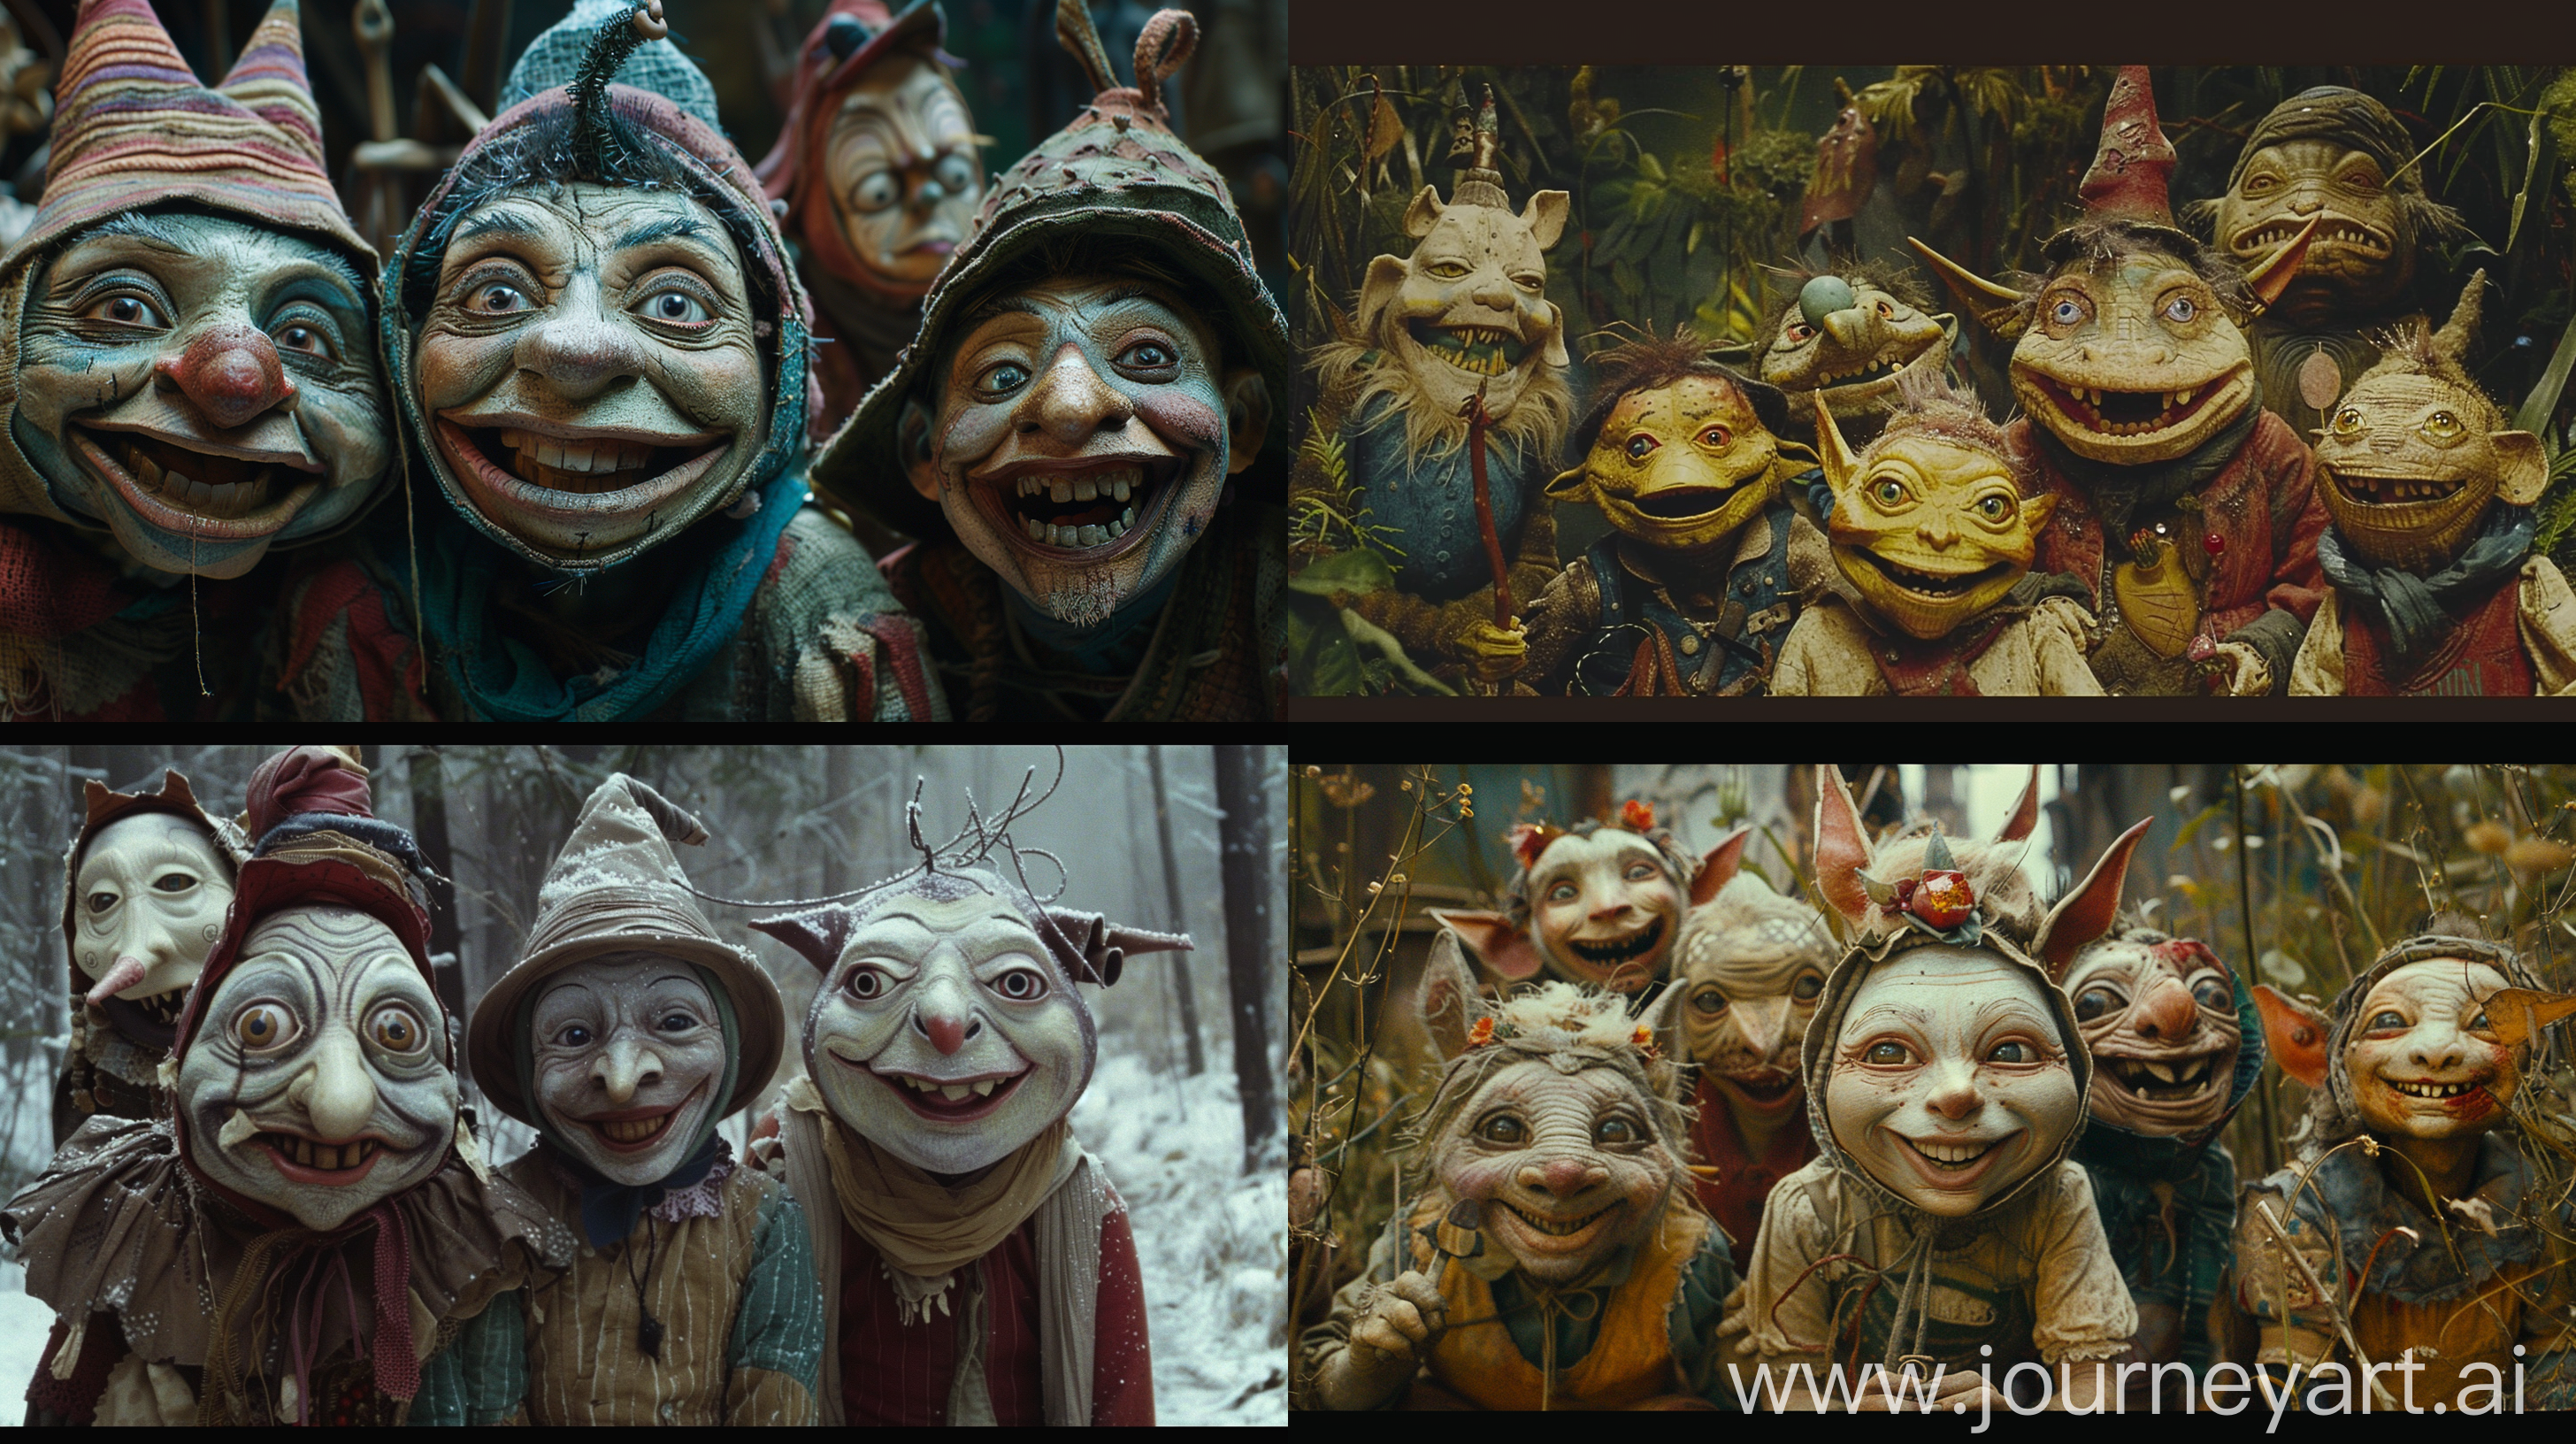 Cinematic film still of happy anamorphic characters from a fairytale movie that doesn't exist if it was, made in the style of Jean Giraud (Moebius):: illustration, cartoon::-0.8 photo::0.8 --v 6.0 --style raw --ar 16:9 --s 130